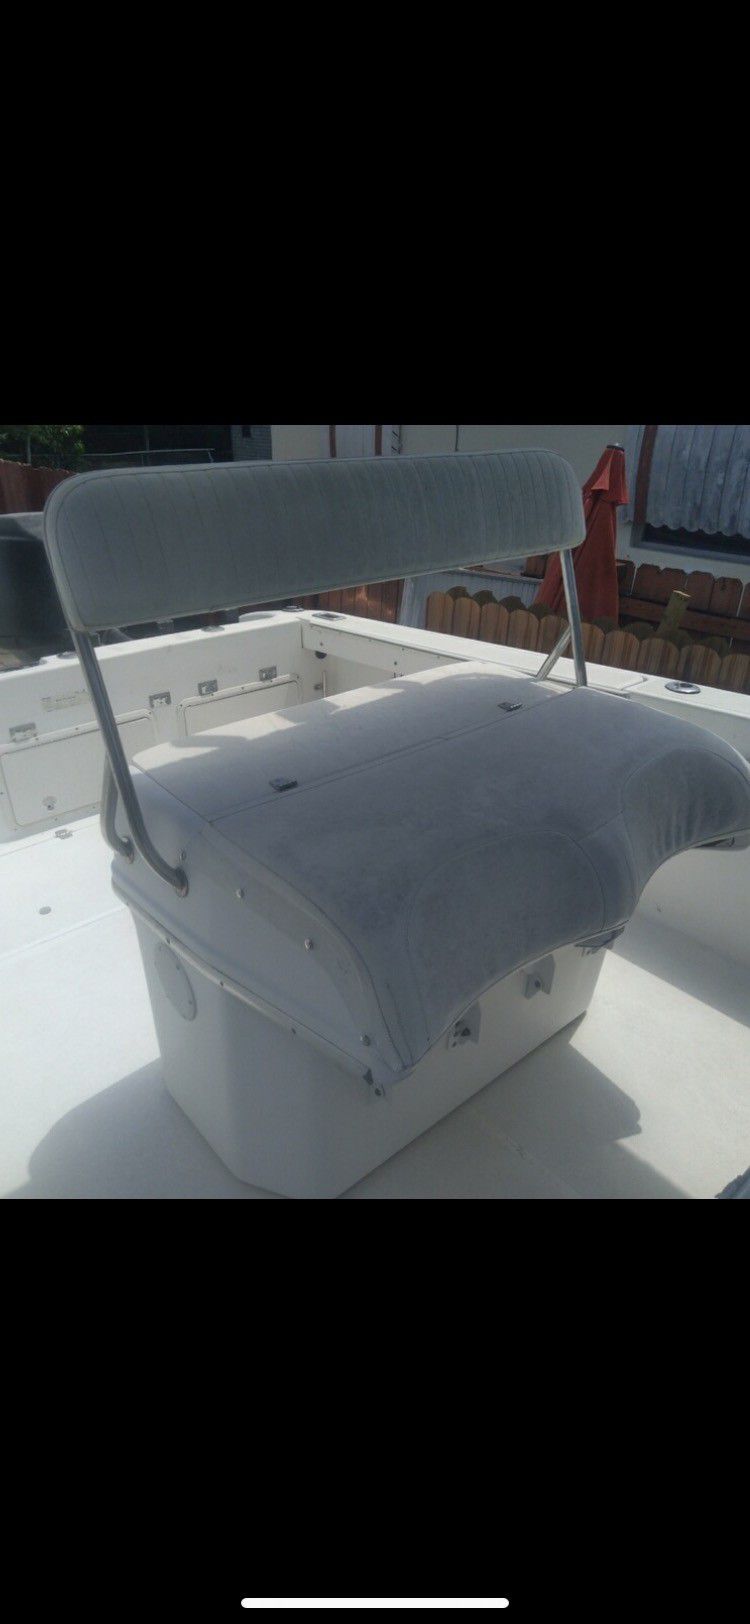 Photo Center Console Off 29 Ft Boat With Live Bait Well Needs Cushion. 425.00